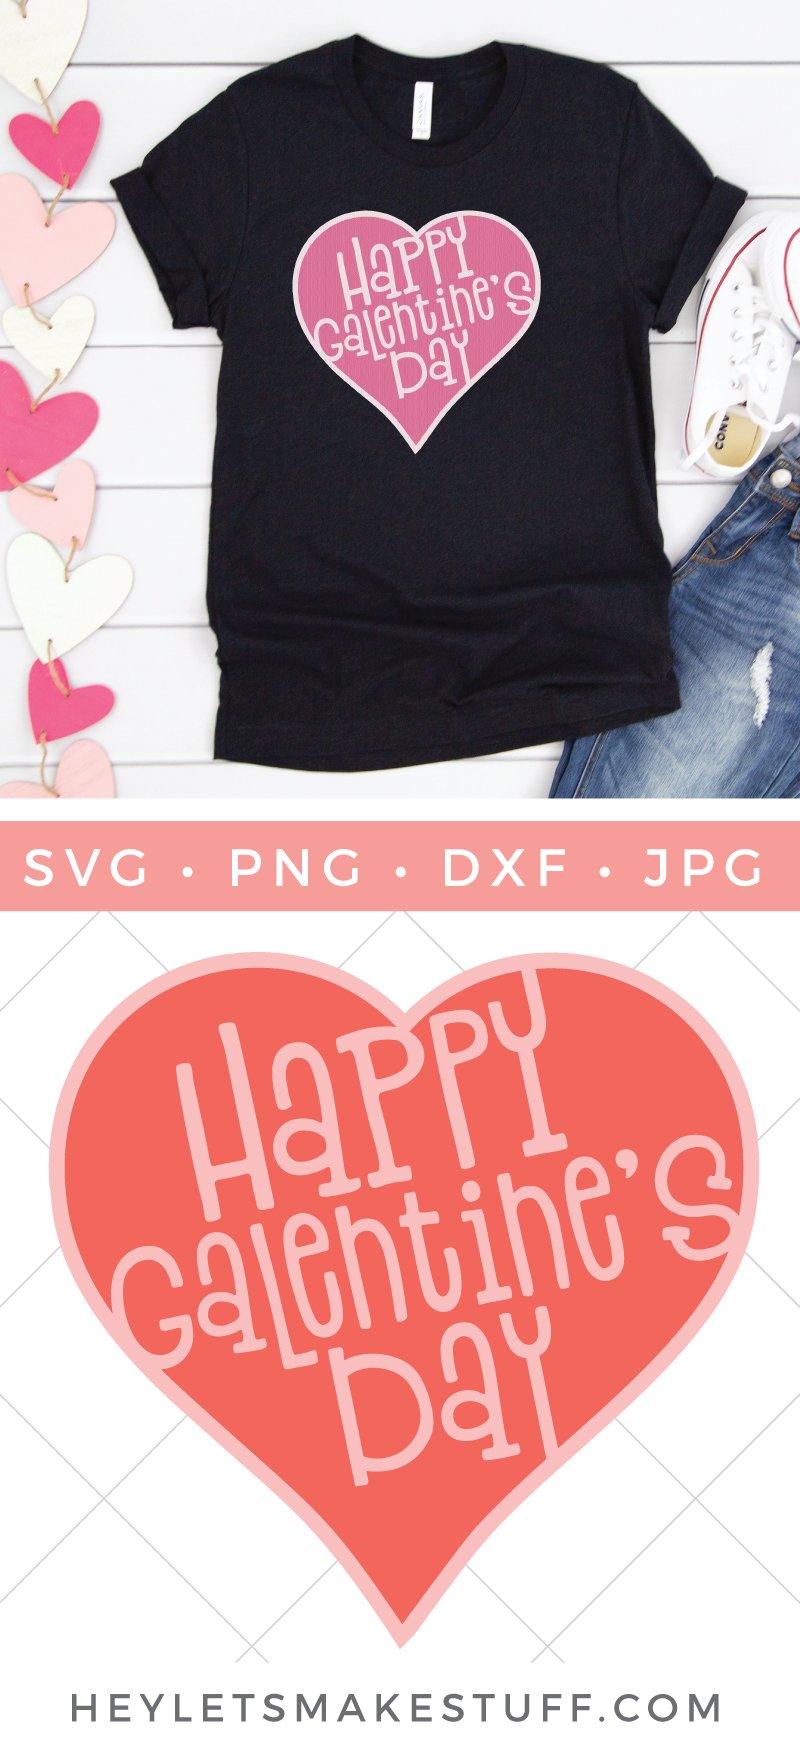 A banner of hearts and a pair of blue jeans and tennis shoes along with a black t-shirt with a pink heart design and the saying, \"Happy Galentine\'s Day\" with advertising of a cut file from HEYLETSMAKESTUFF.COM